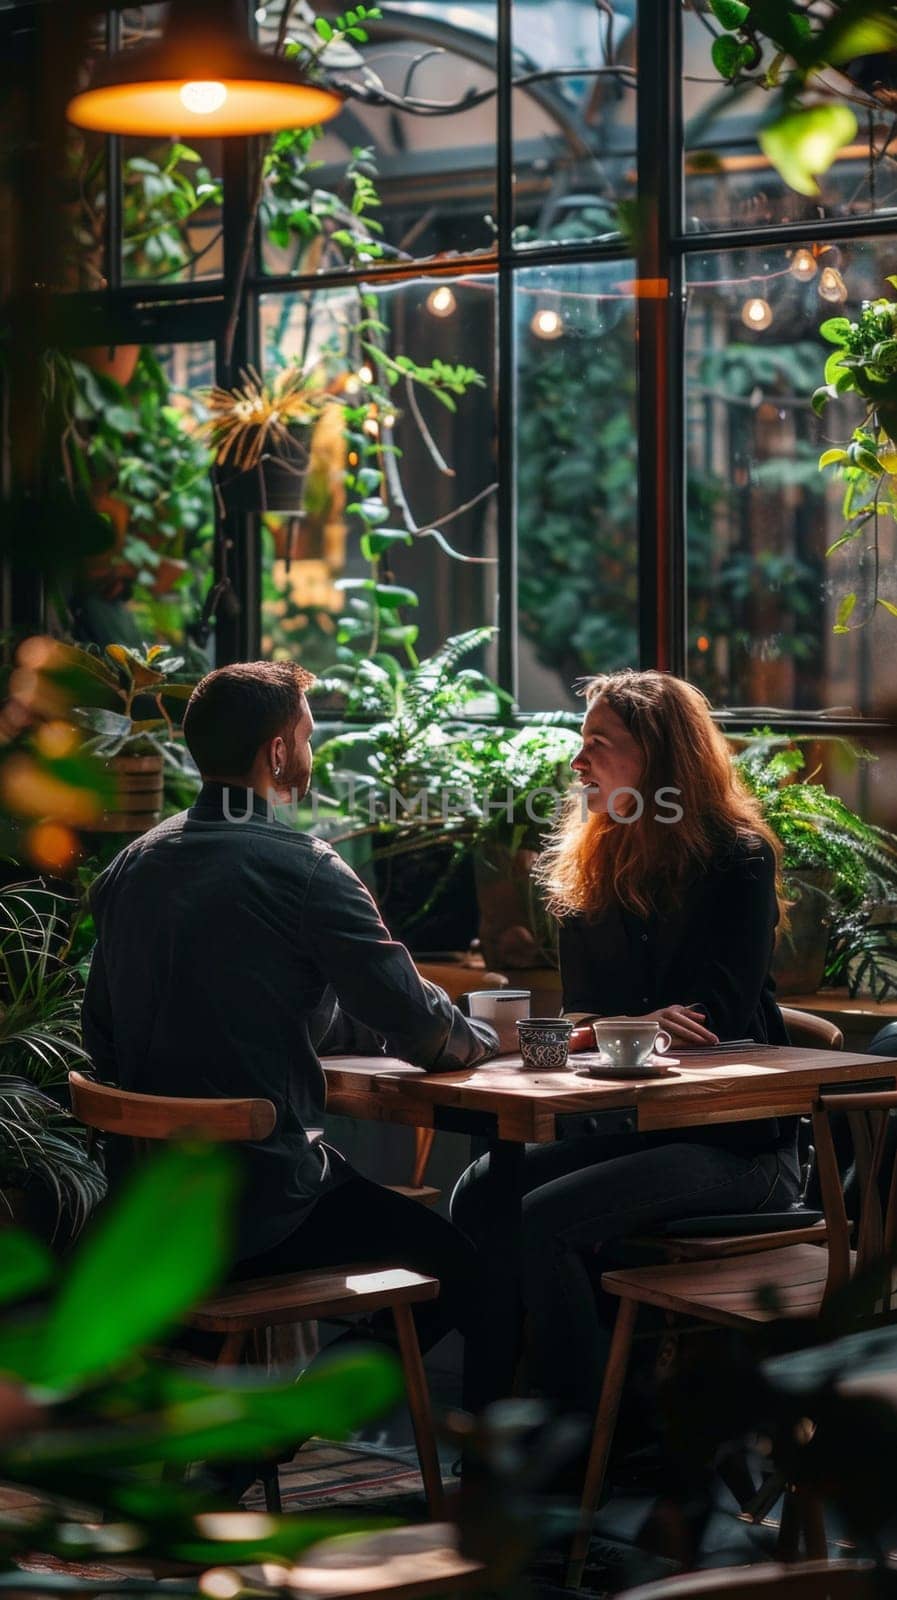 A couple sitting at a table in front of plants and trees, AI by starush